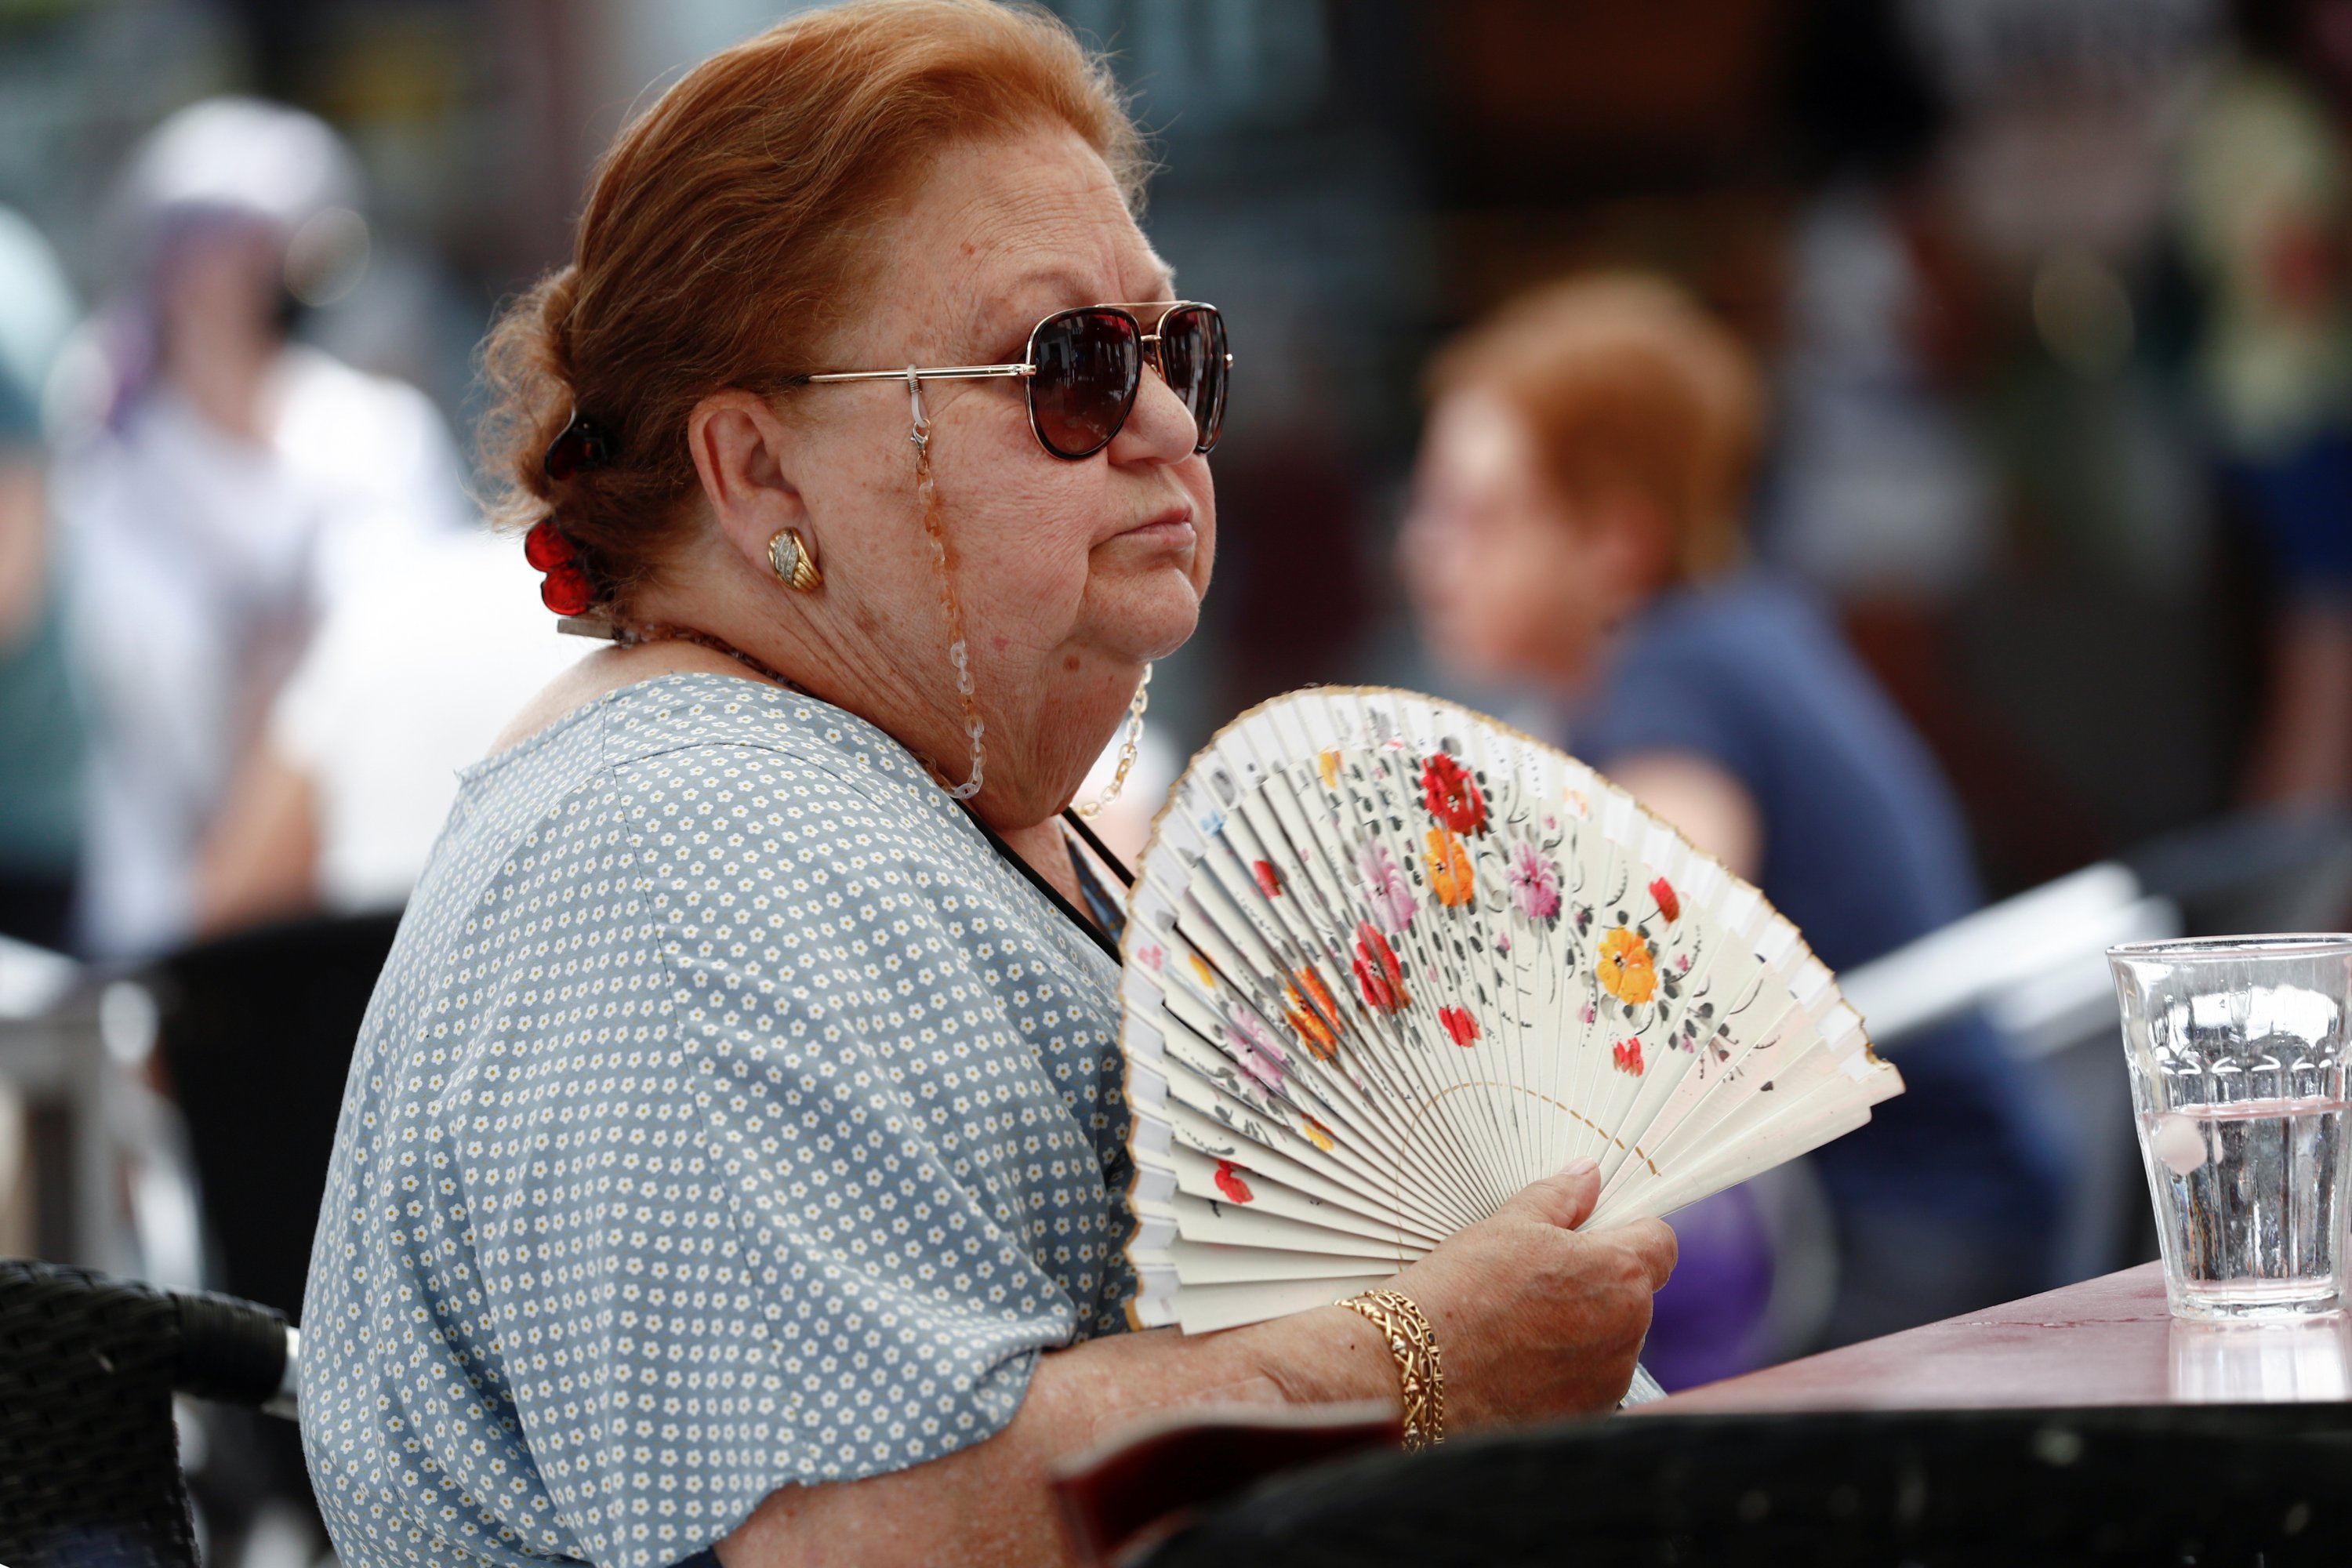 A woman uses a fan to cool off as heatwave hits the country, in Madrid, Spain, July 10, 2021. (Reuters Photo) 